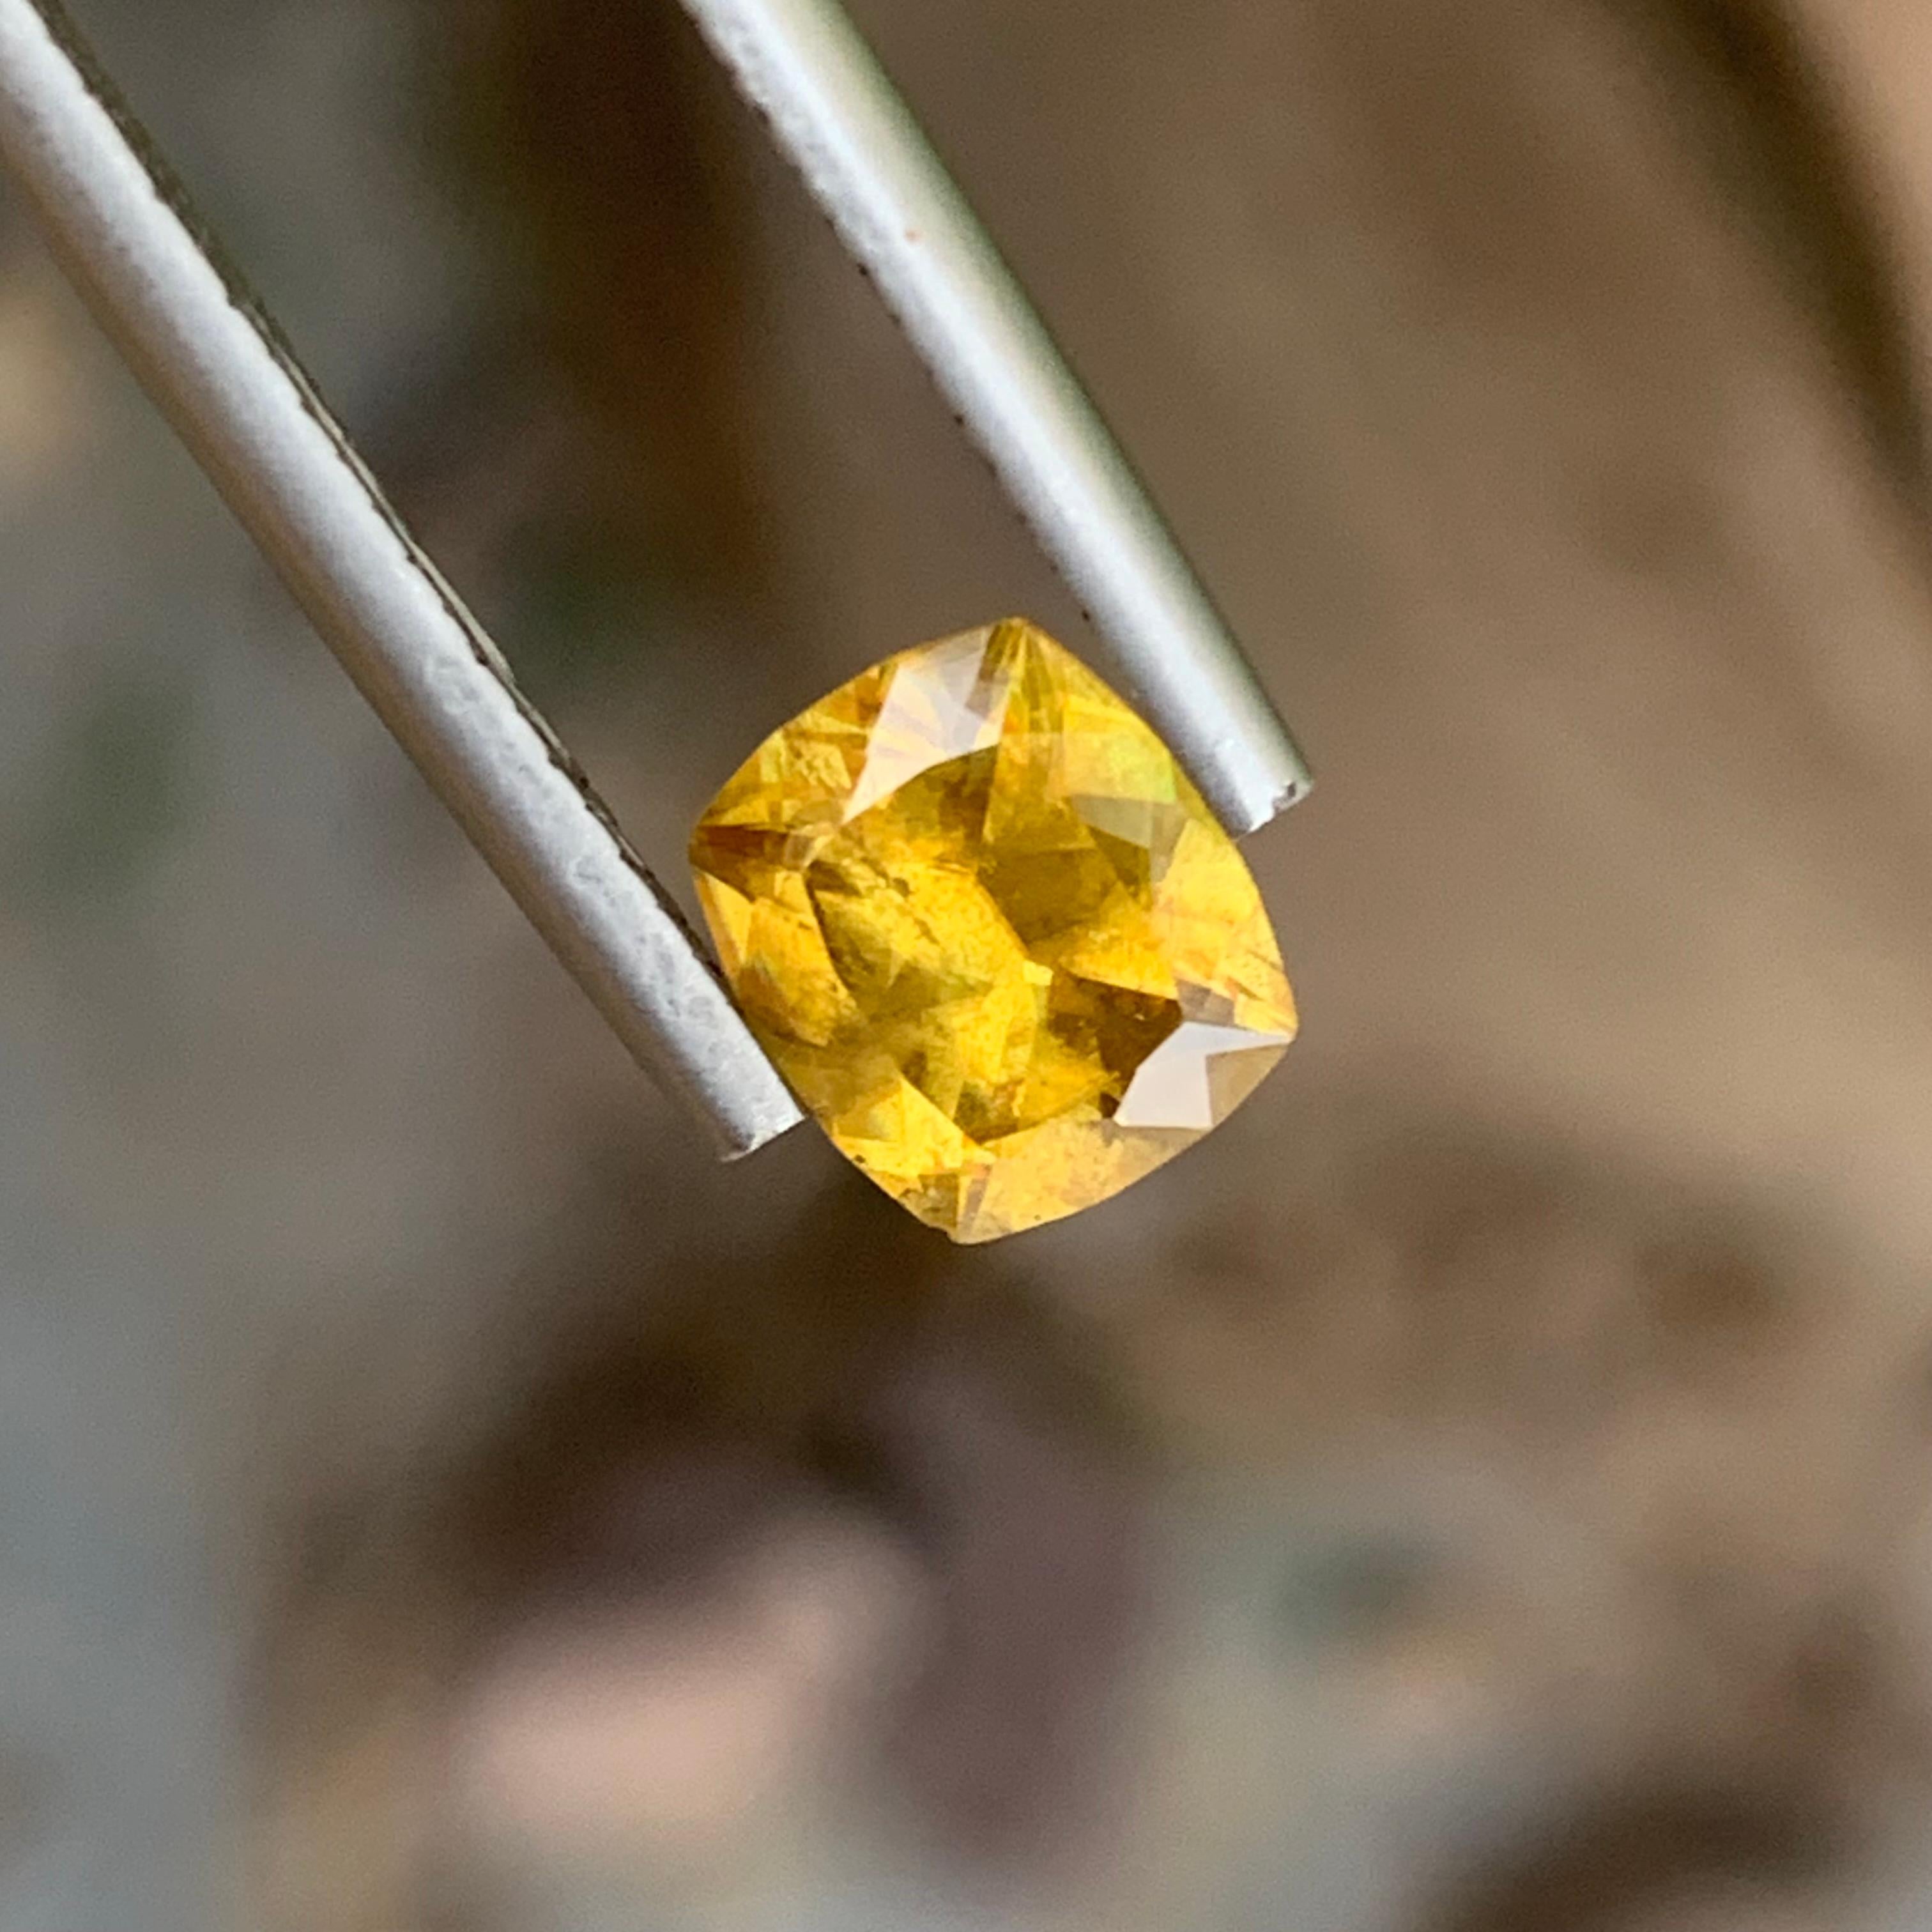 Faceted Sphene
Weight: 1.35 Carats 
Dimension: 7.3x6.4x3.8 Mm
Origin: Warsak Pakistan 
Shape: Cushion
Color: Yellow
Treatment: Non
Certificate: On Demand
Yellow sphene, also known as titanite, is a captivating and rare gemstone celebrated for its